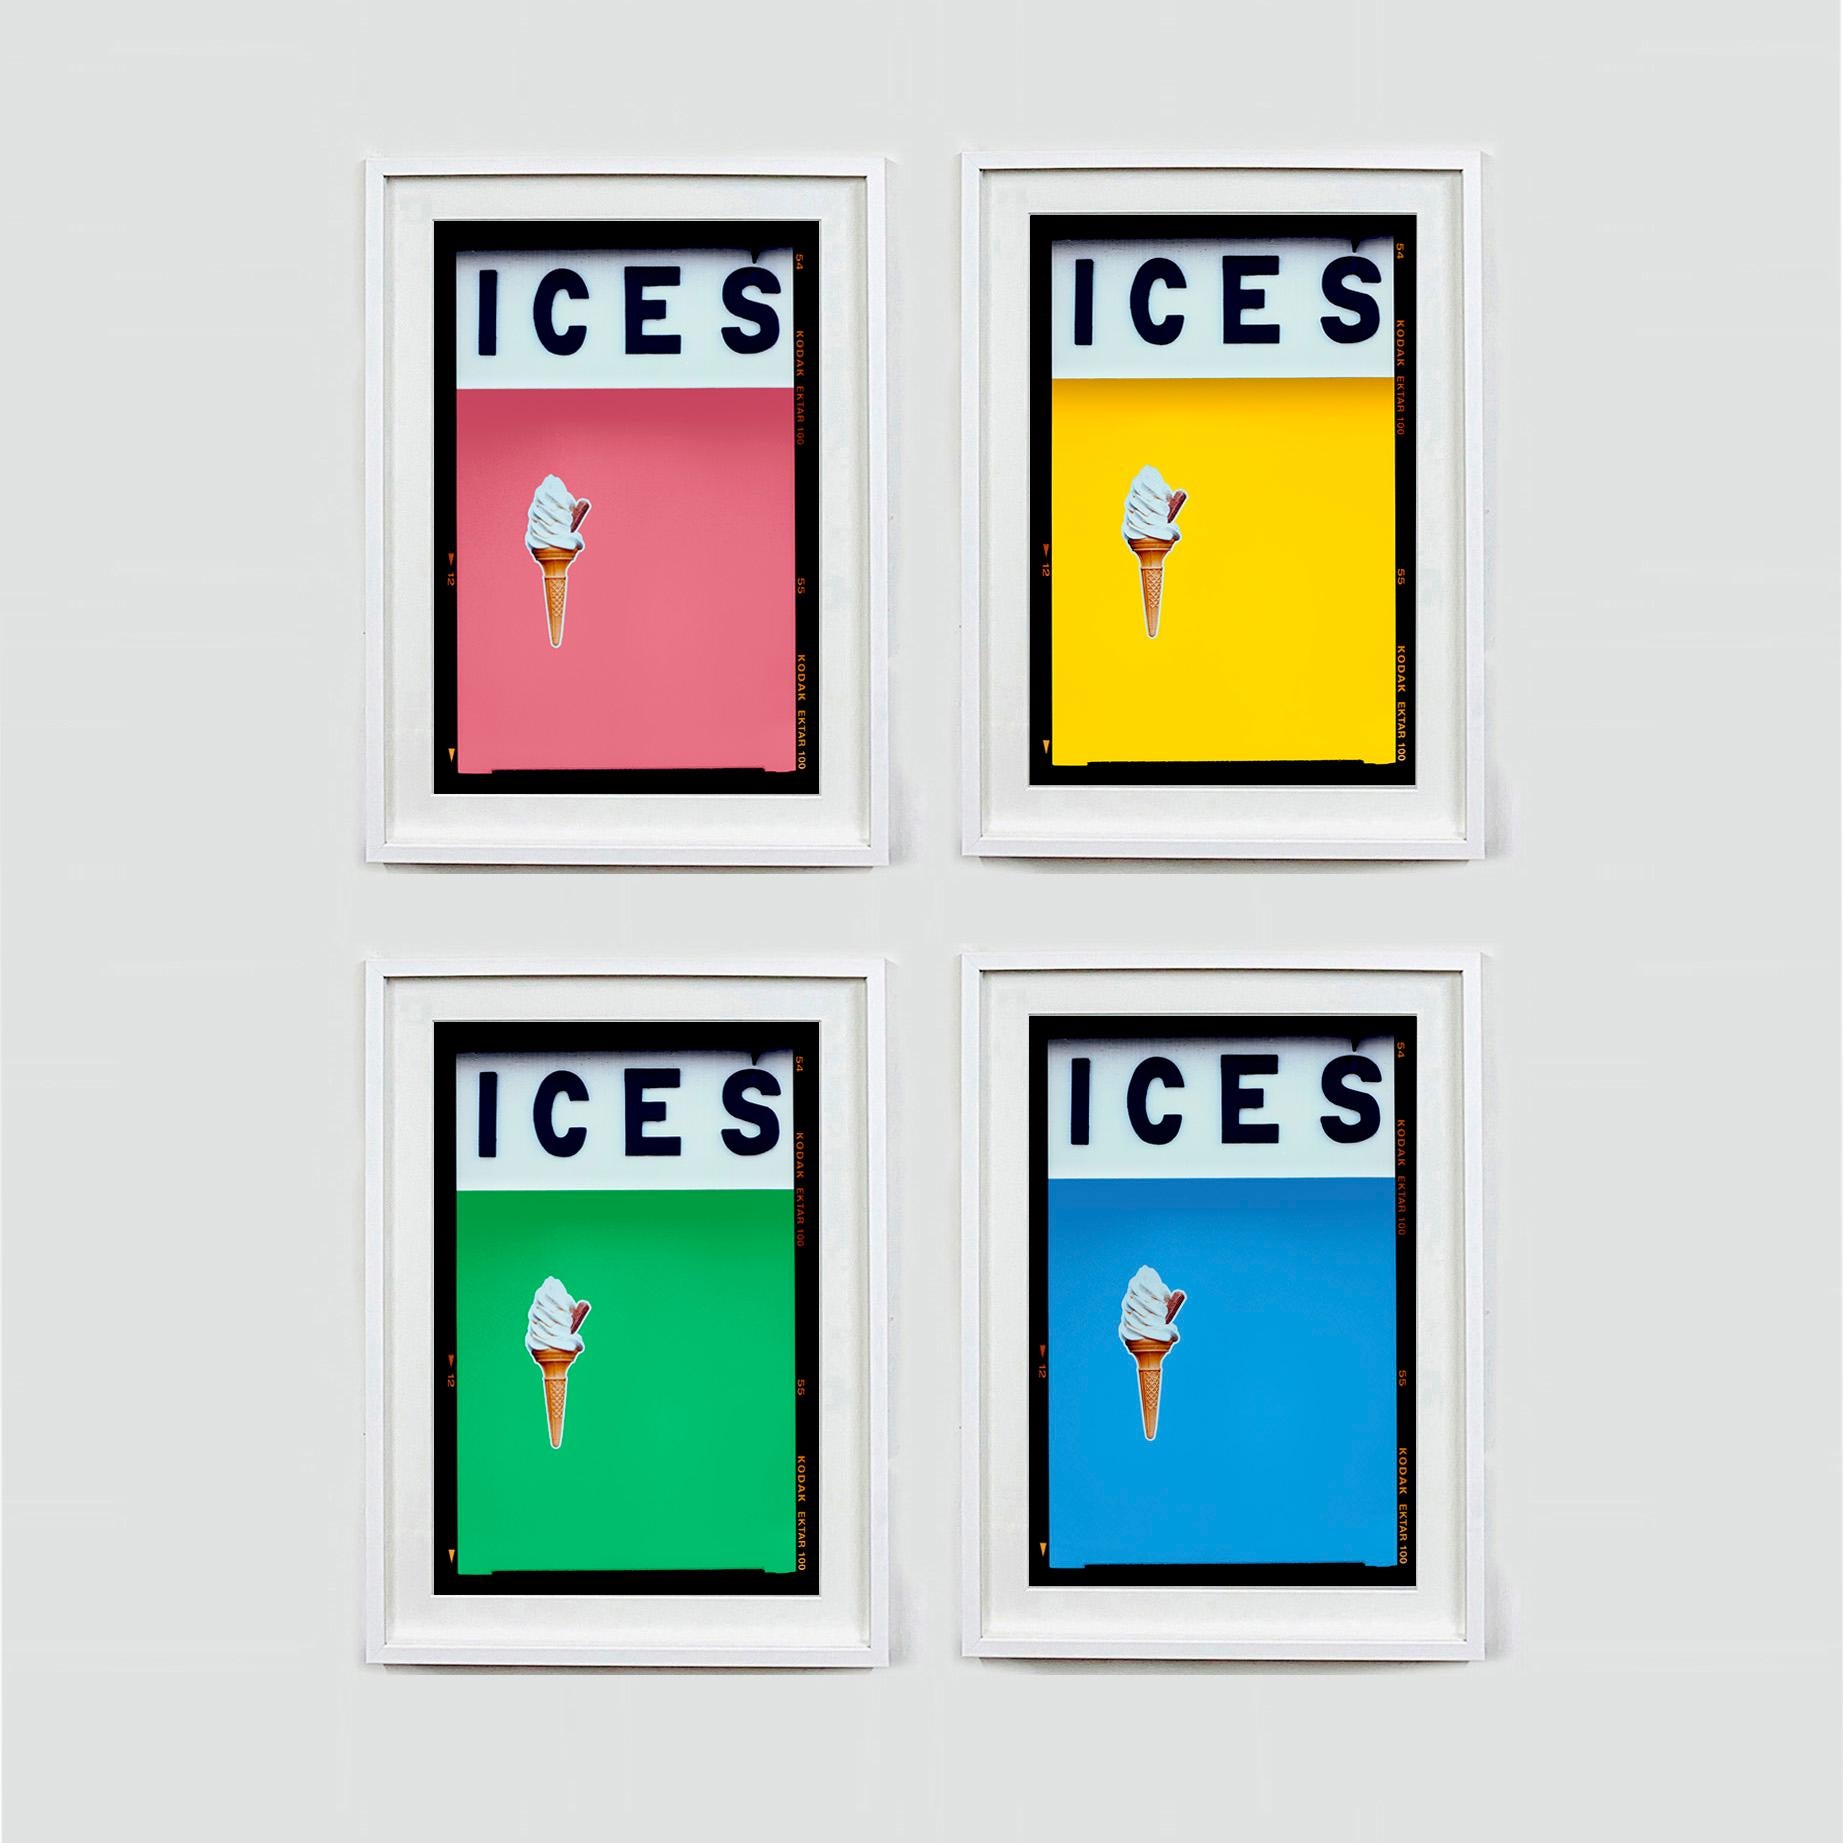 ICES, by Richard Heeps, photographed at the British Seaside at the end of summer 2020. This artwork is about evoking memories of the simple joy of days by the beach. The coral pink color blocking, typography and the surreal twist of the suspended